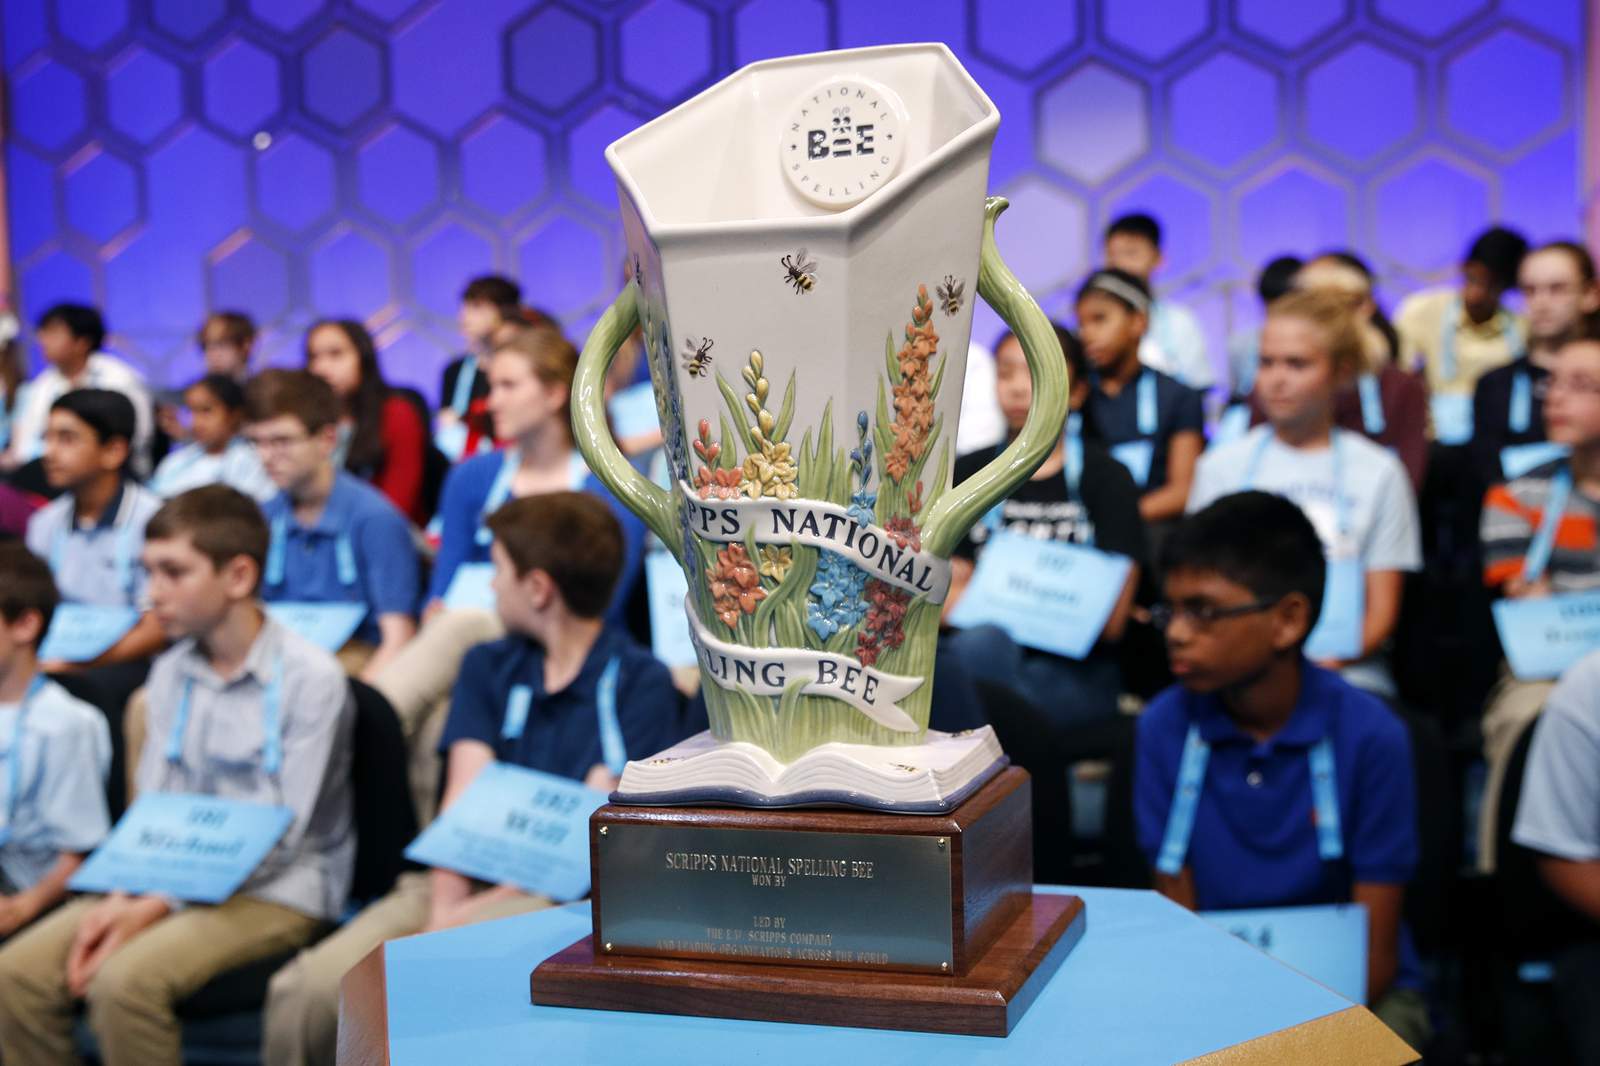 Nonprofit leader takes over as National Spelling Bee chief